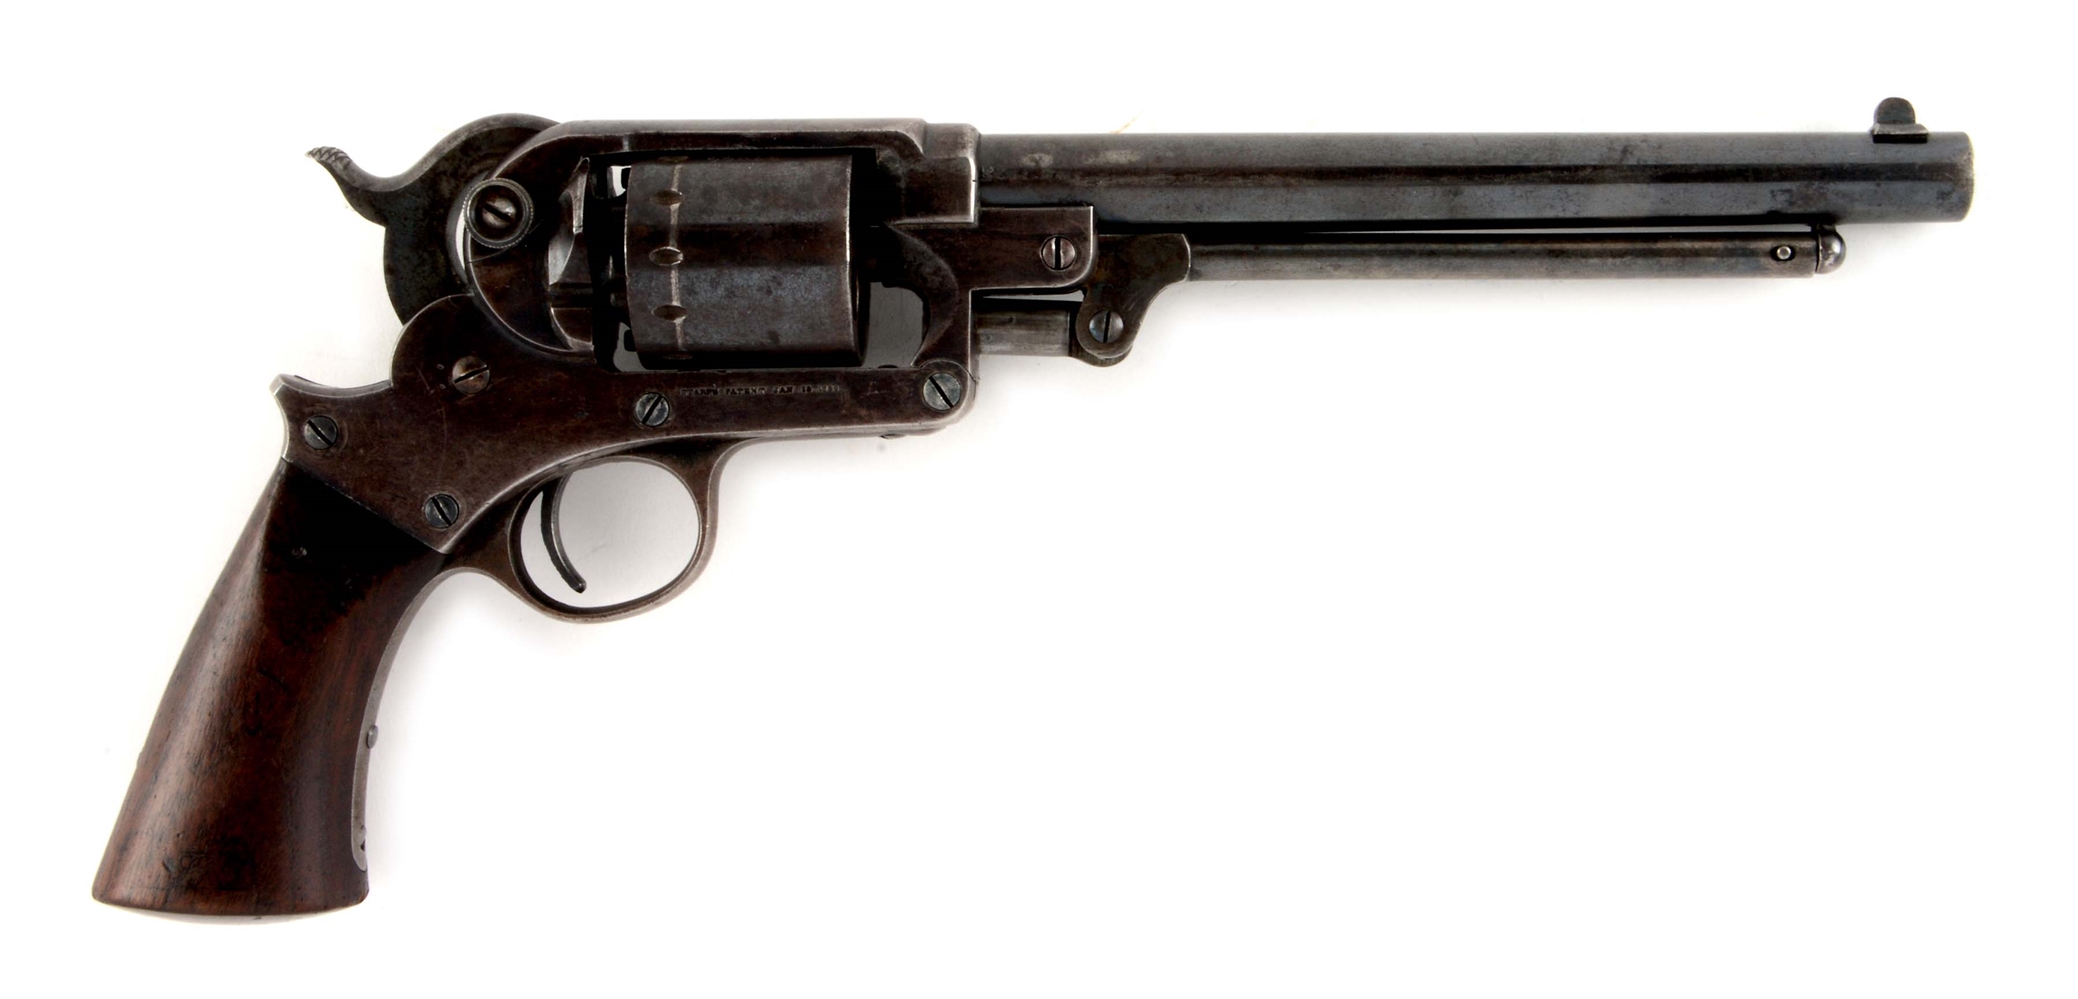 (A) STAR MODEL 1863 SINGLE ACTION ARMY REVOLVER